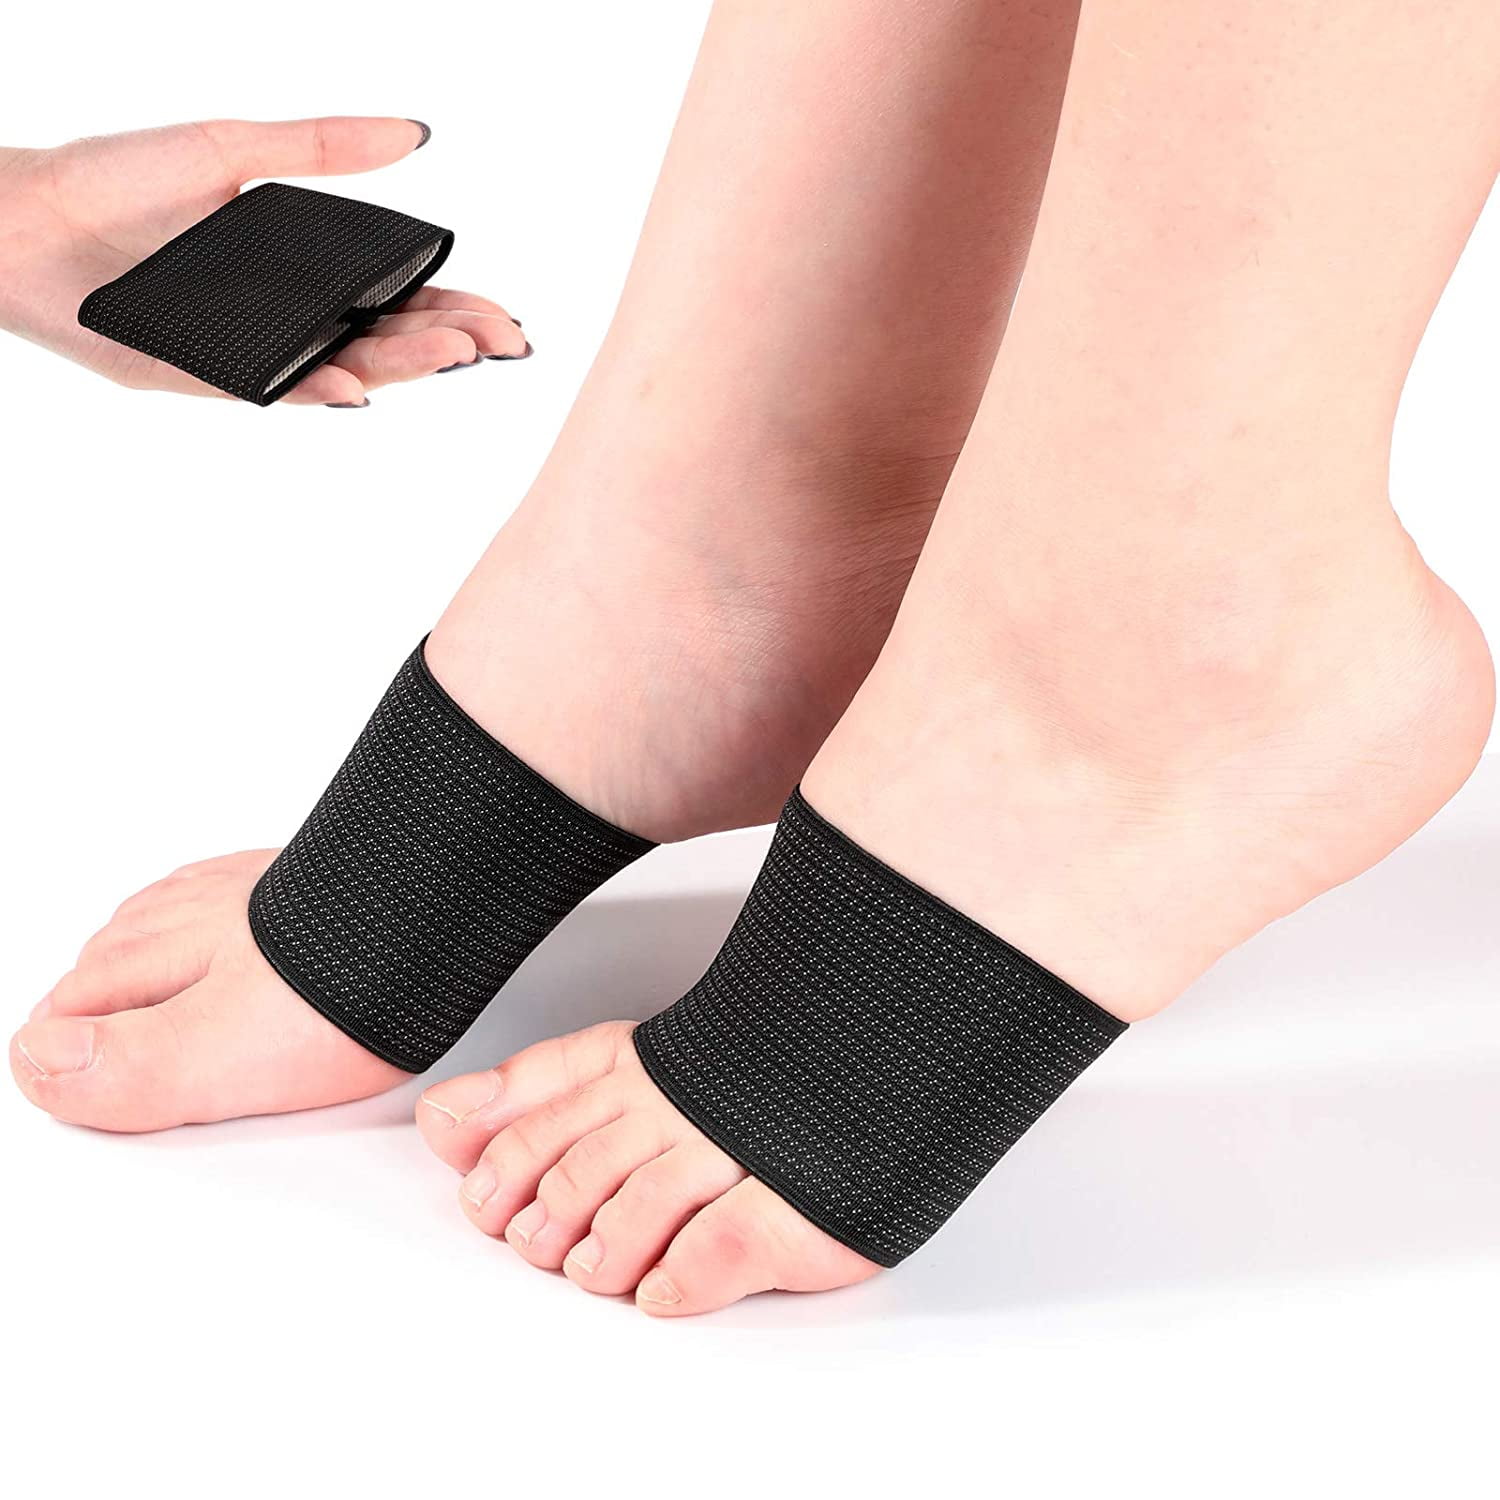 ALUED 2 Pairs Compression Arch Support Sleeves, Sports Bandage Plantar ...